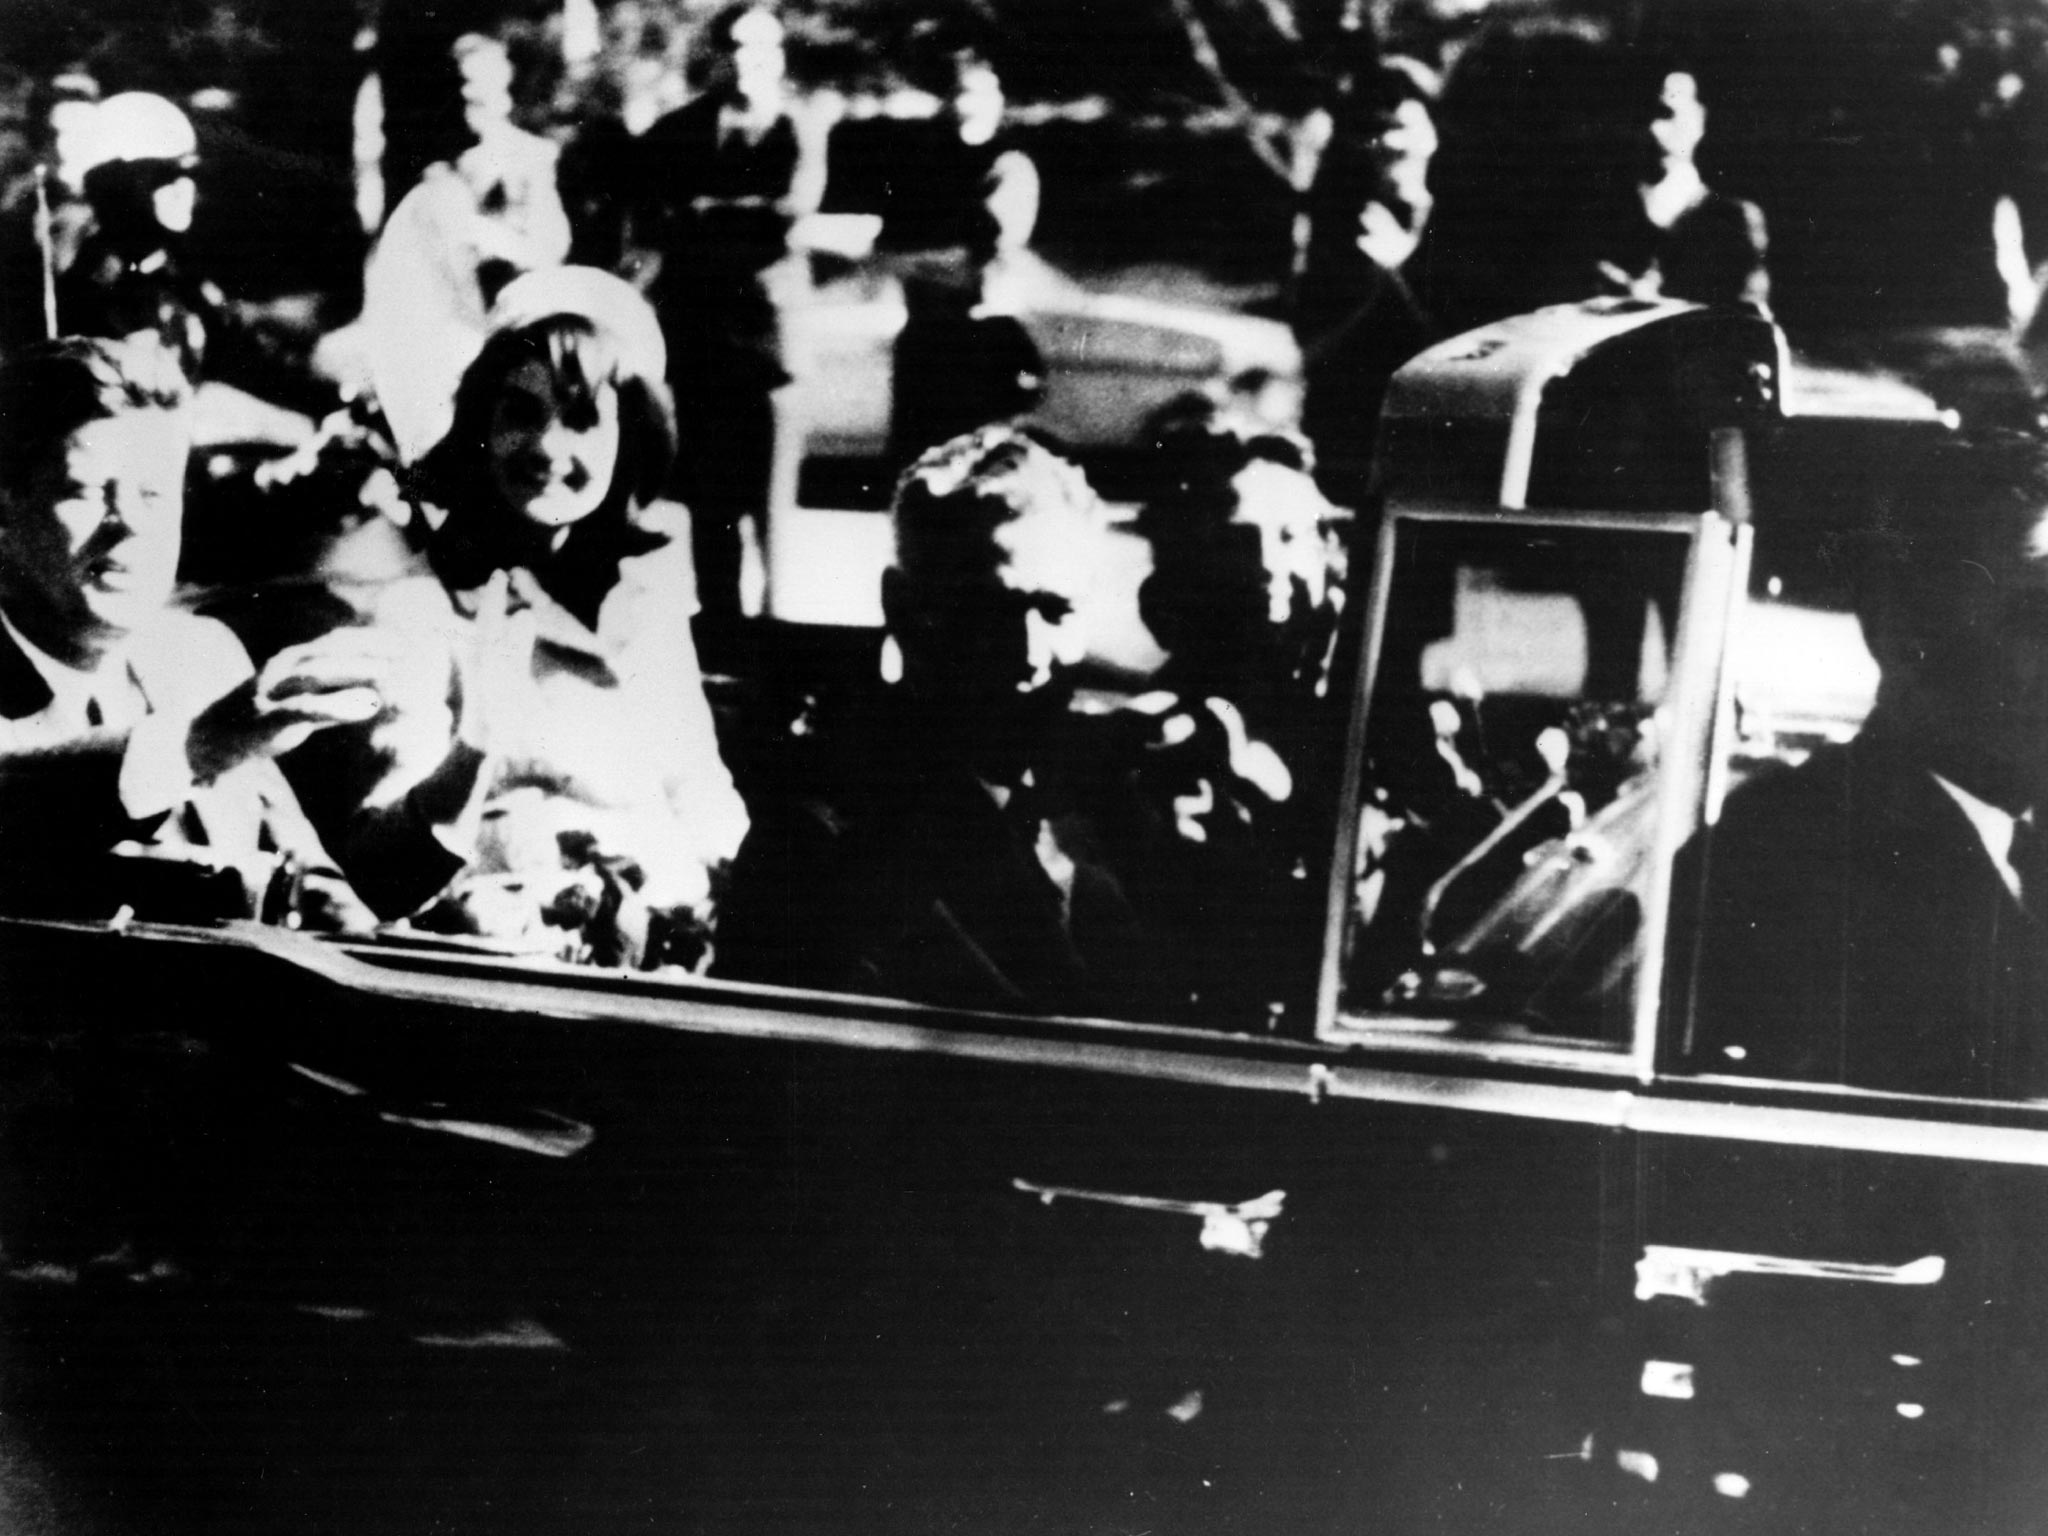 President John F. Kennedy (1917 - 1963) and his wife Jacqueline Kennedy ride with secret agents in an open car motorcade shortly before the president was assassinated in Dallas, Texas